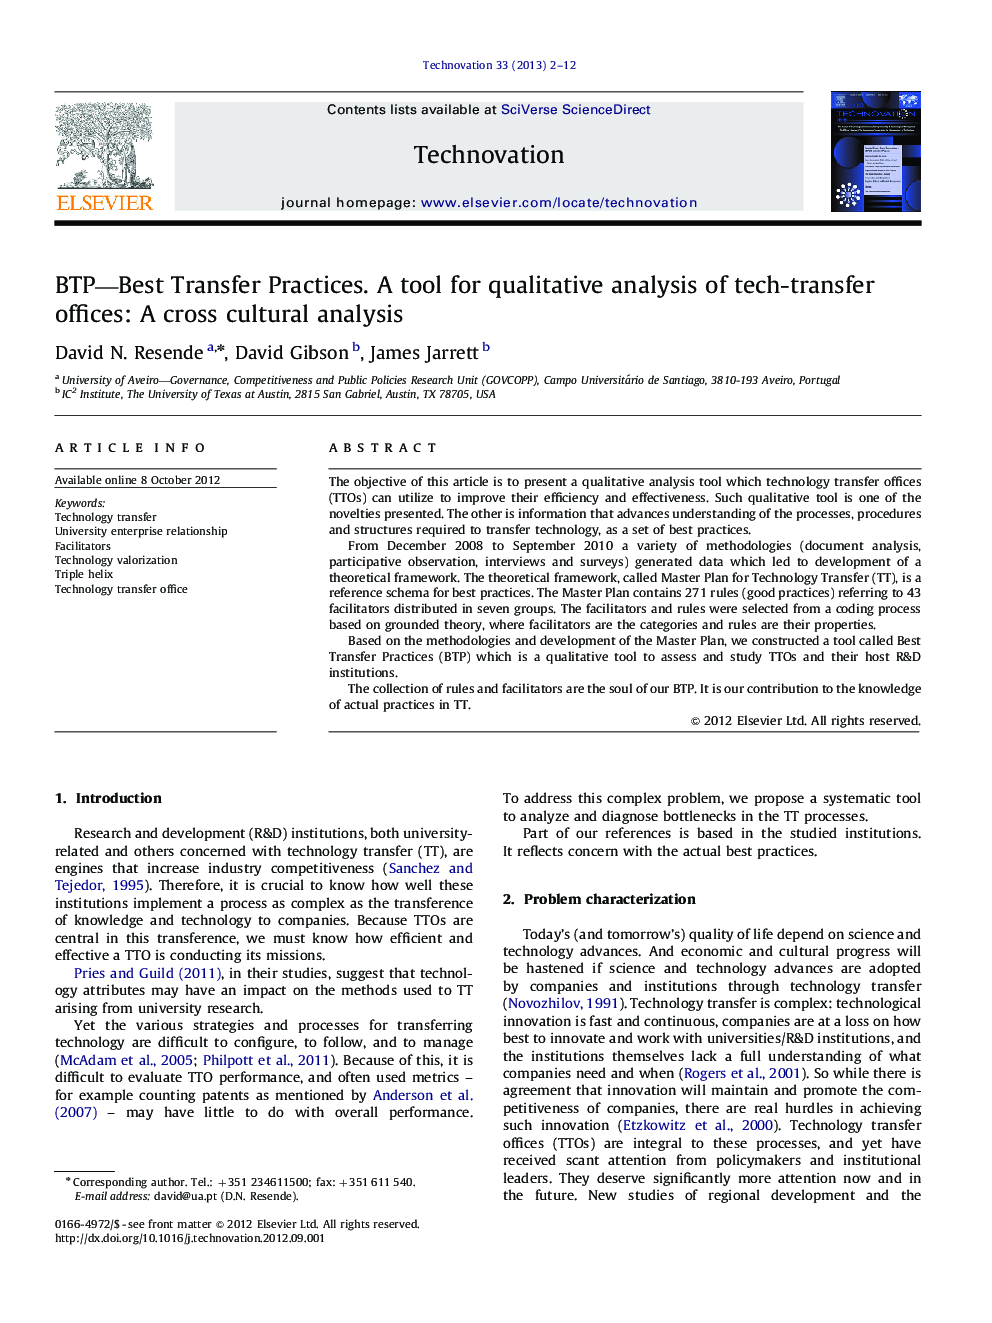 BTP—Best Transfer Practices. A tool for qualitative analysis of tech-transfer offices: A cross cultural analysis